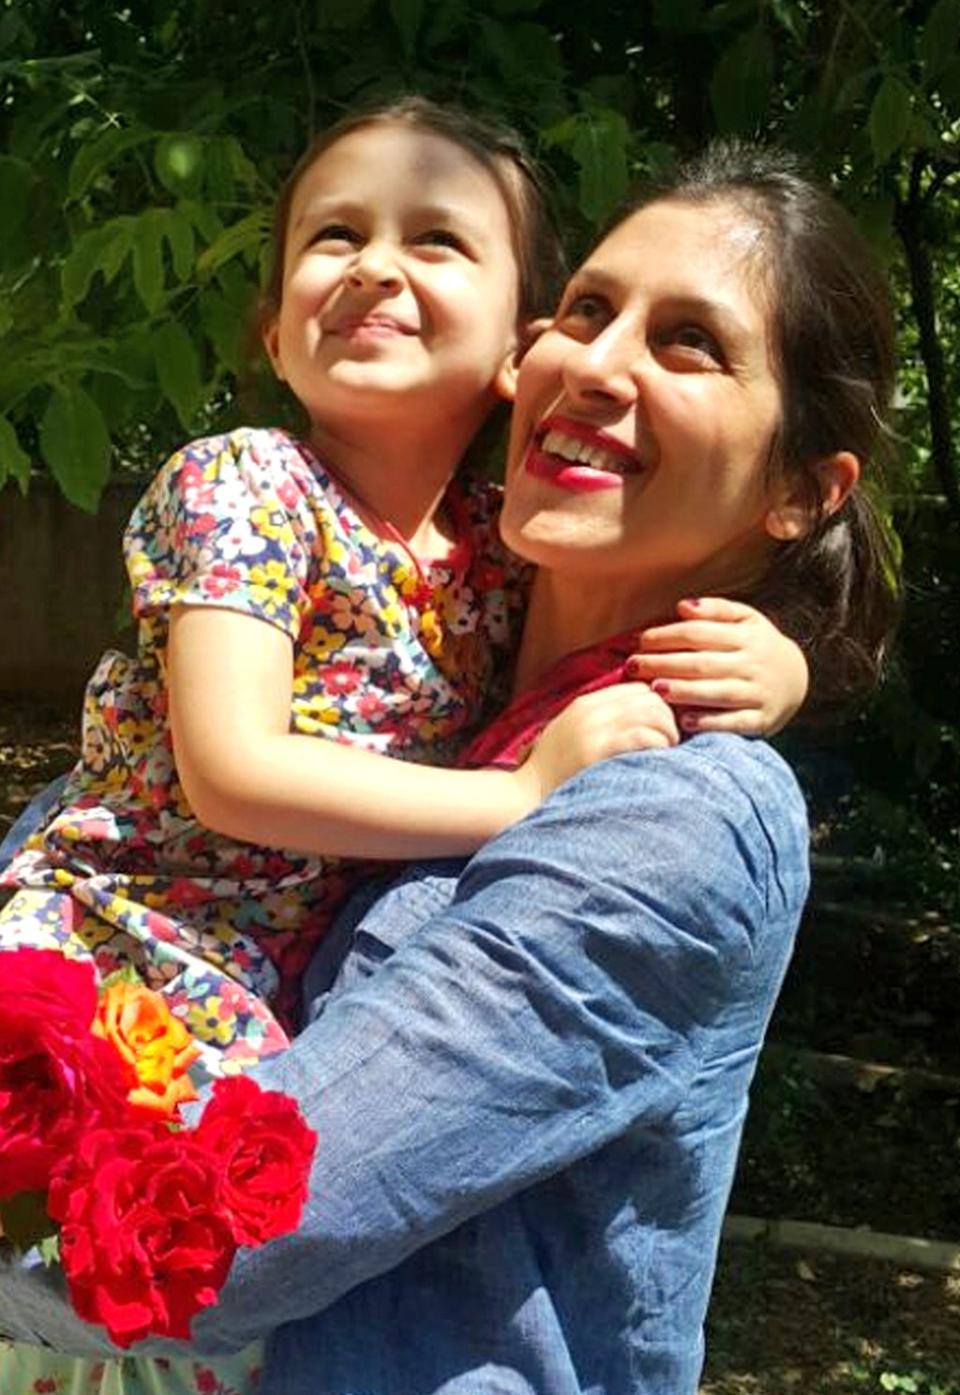 Zaghari-Ratcliffe with her daughter Gabriella in 2018, while Gabriella was living with her grandparents in Tehran (PA Media)